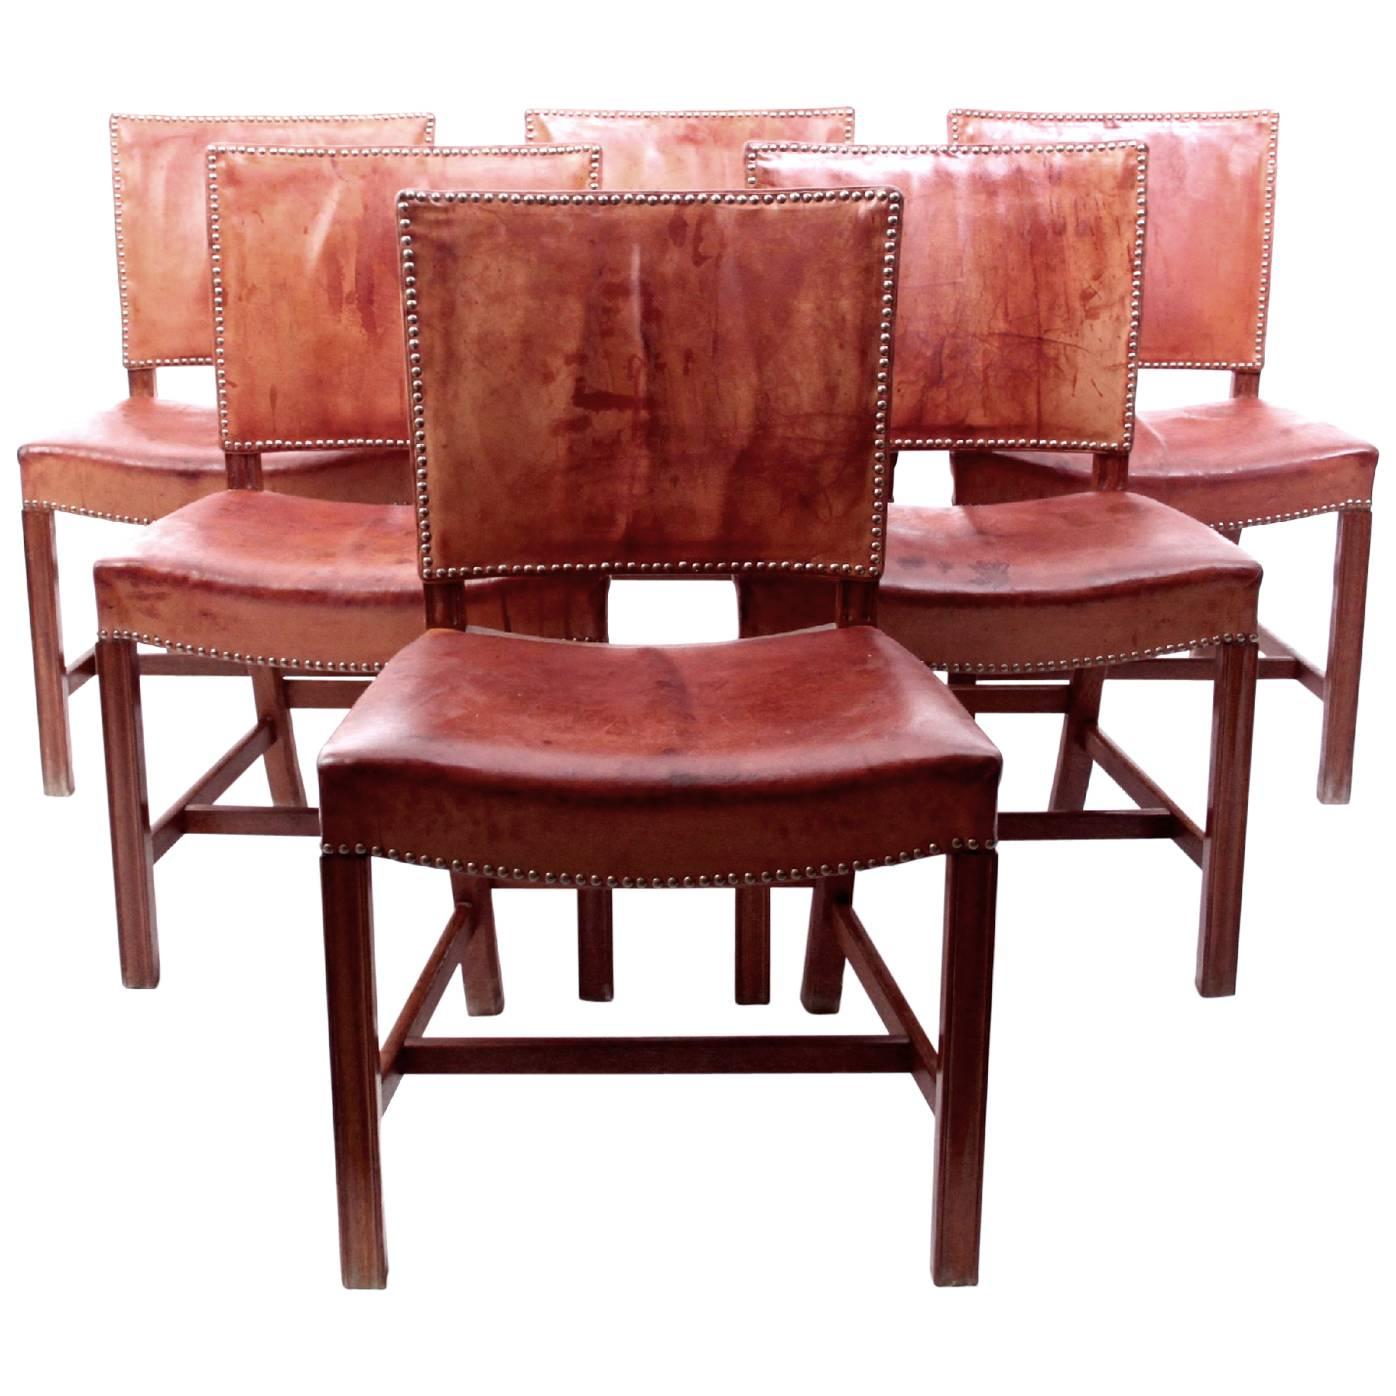 Kaare Klint Set of Six Red Chairs with Original Leather